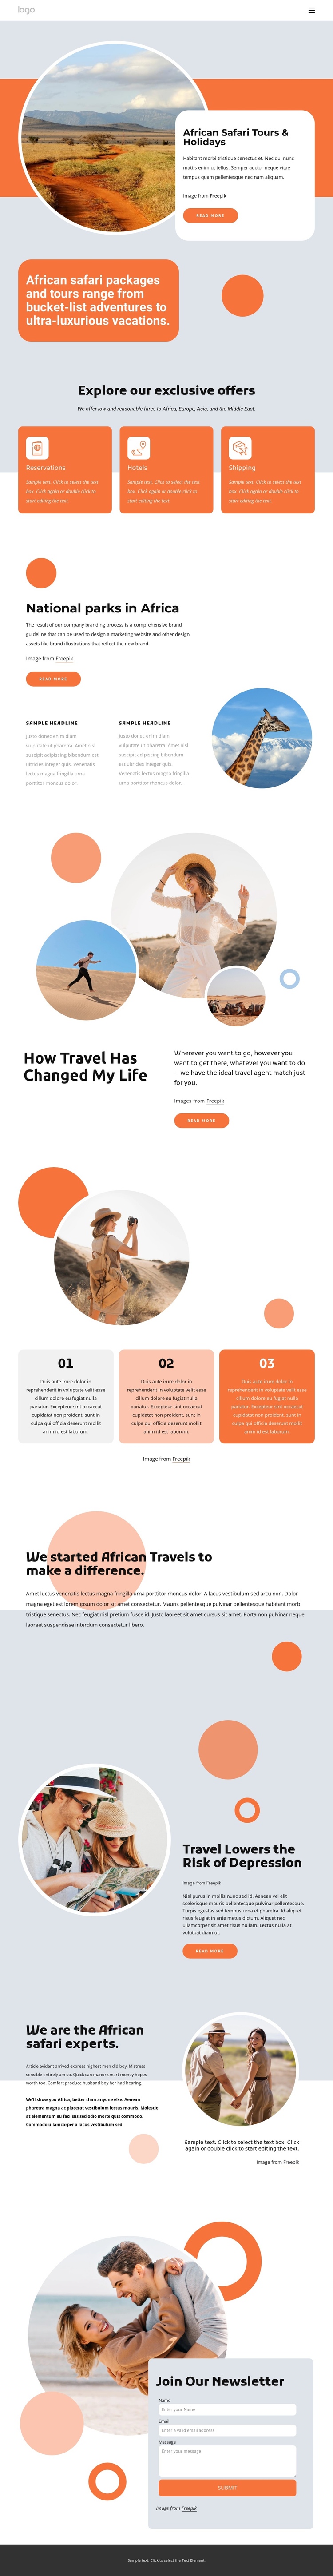 African safari holidays One Page Template